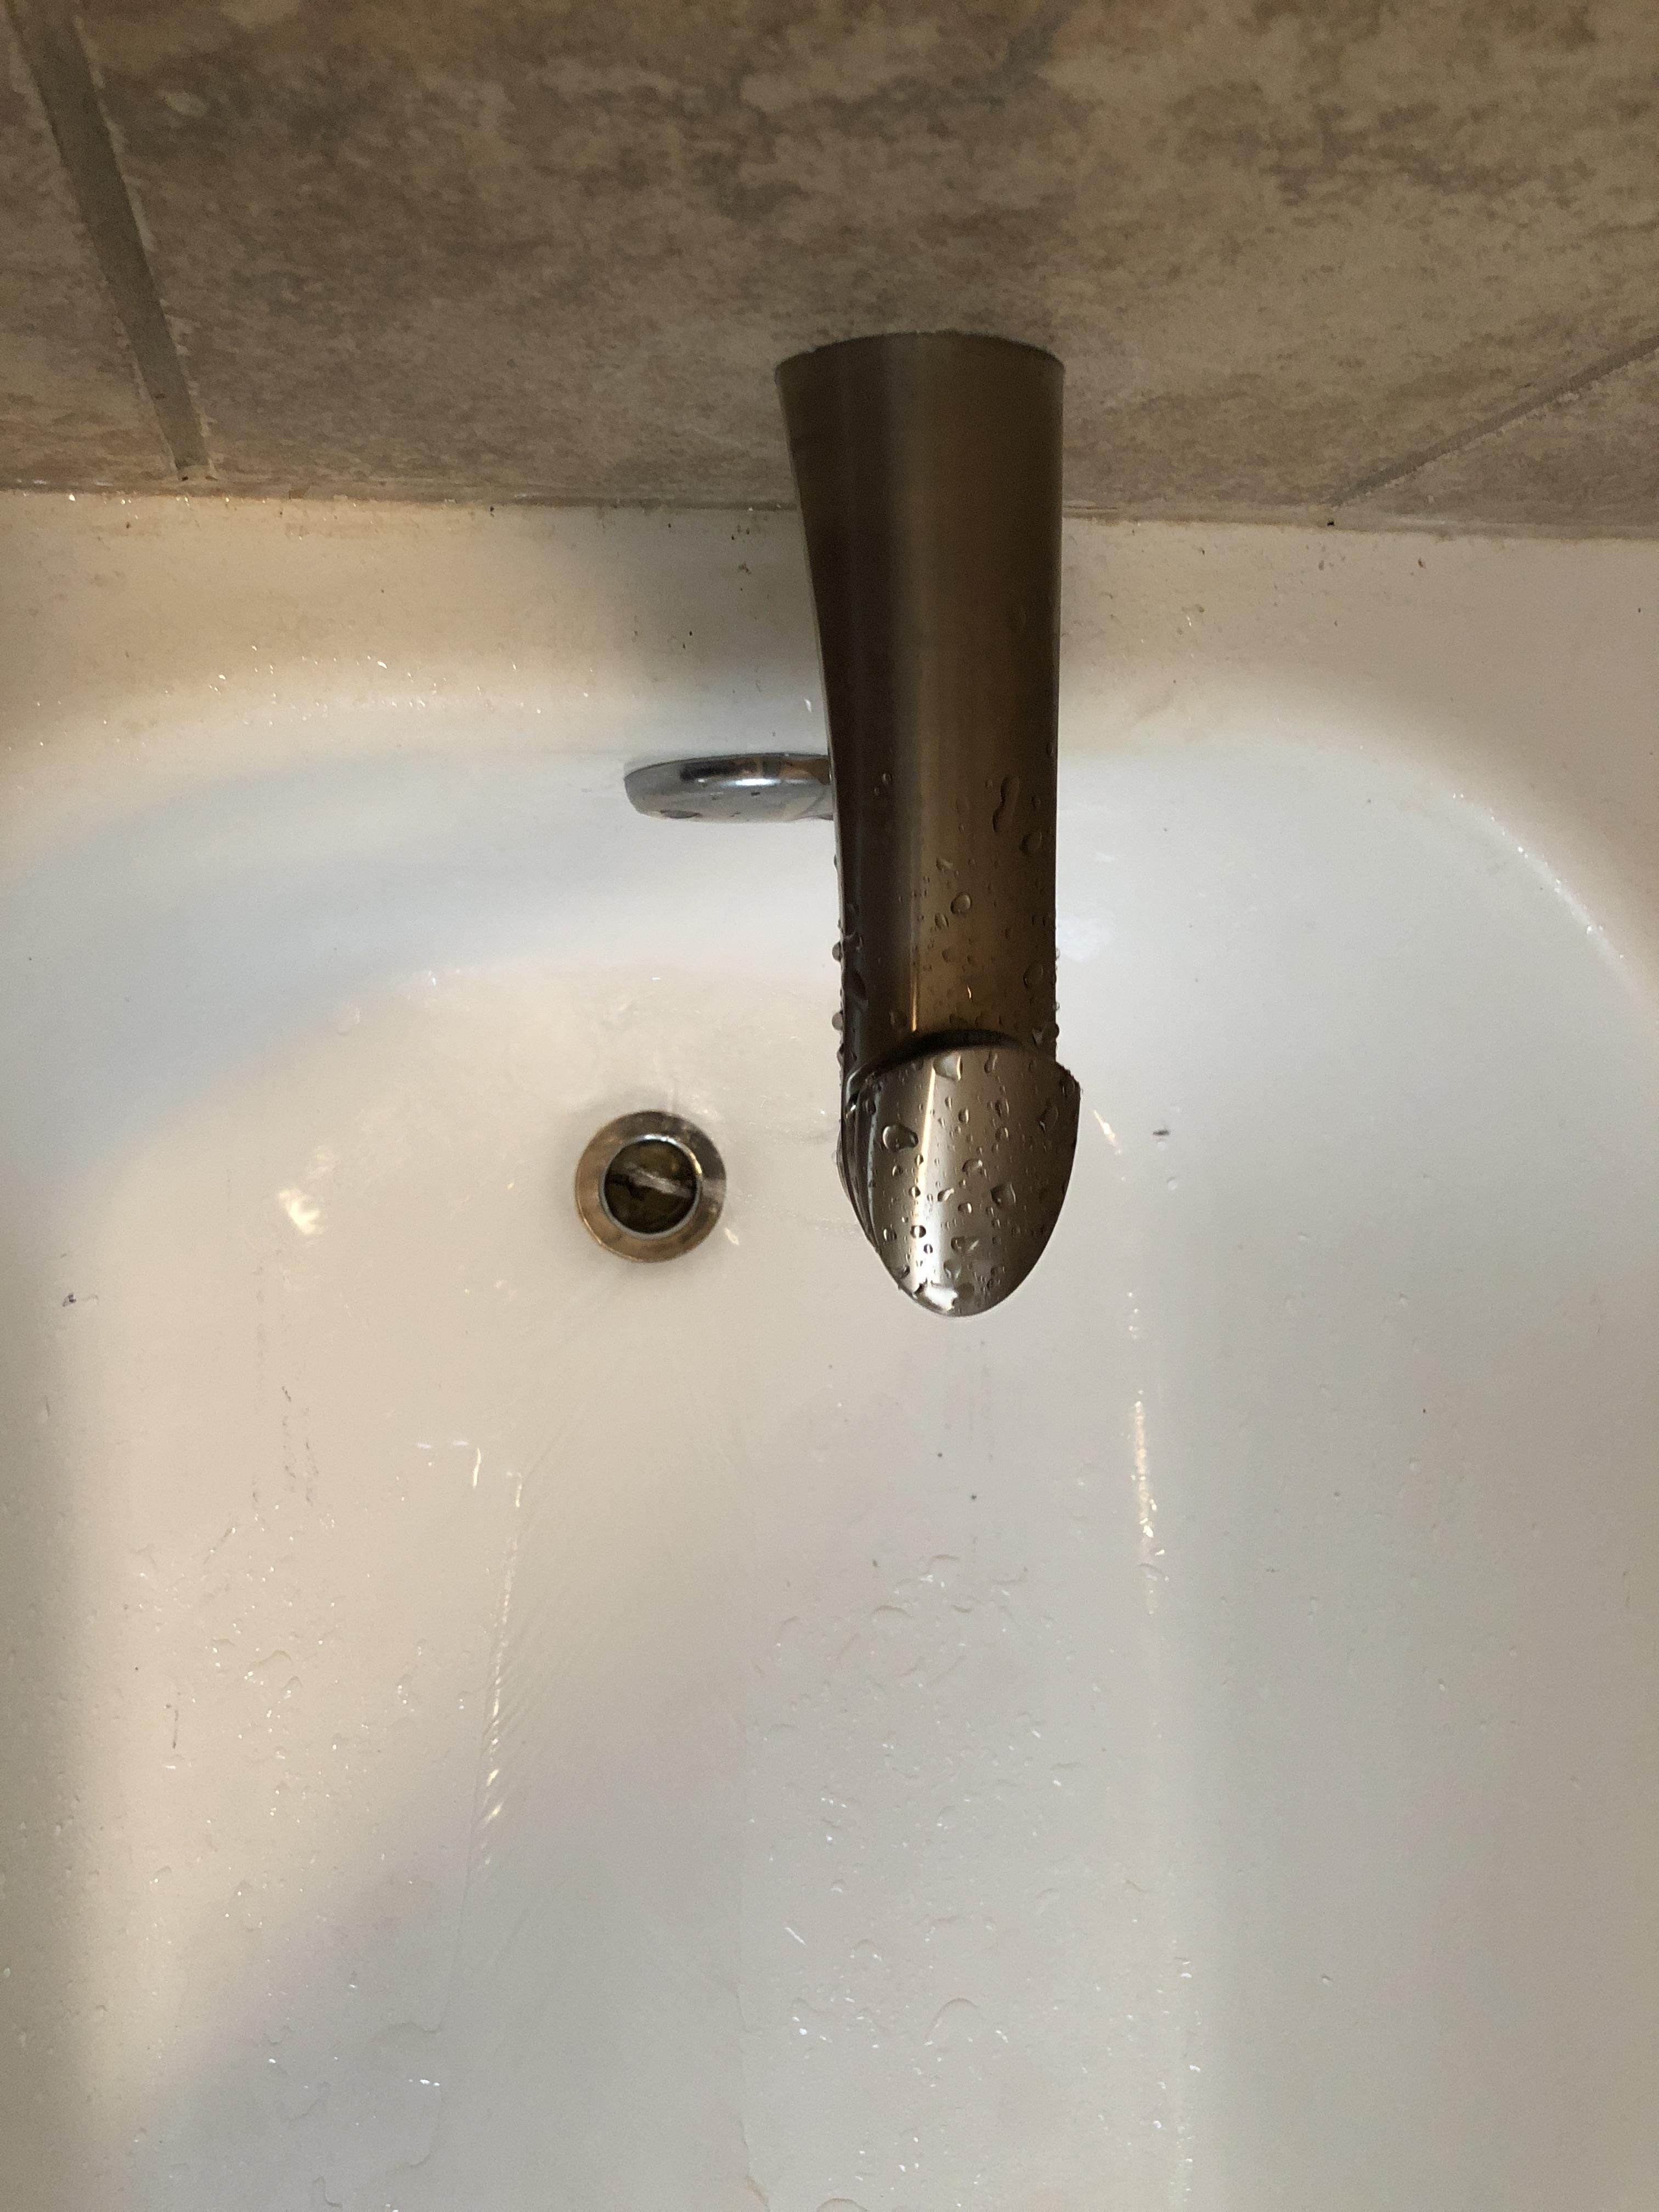 New tub faucet; Afraid to drop the soap now!